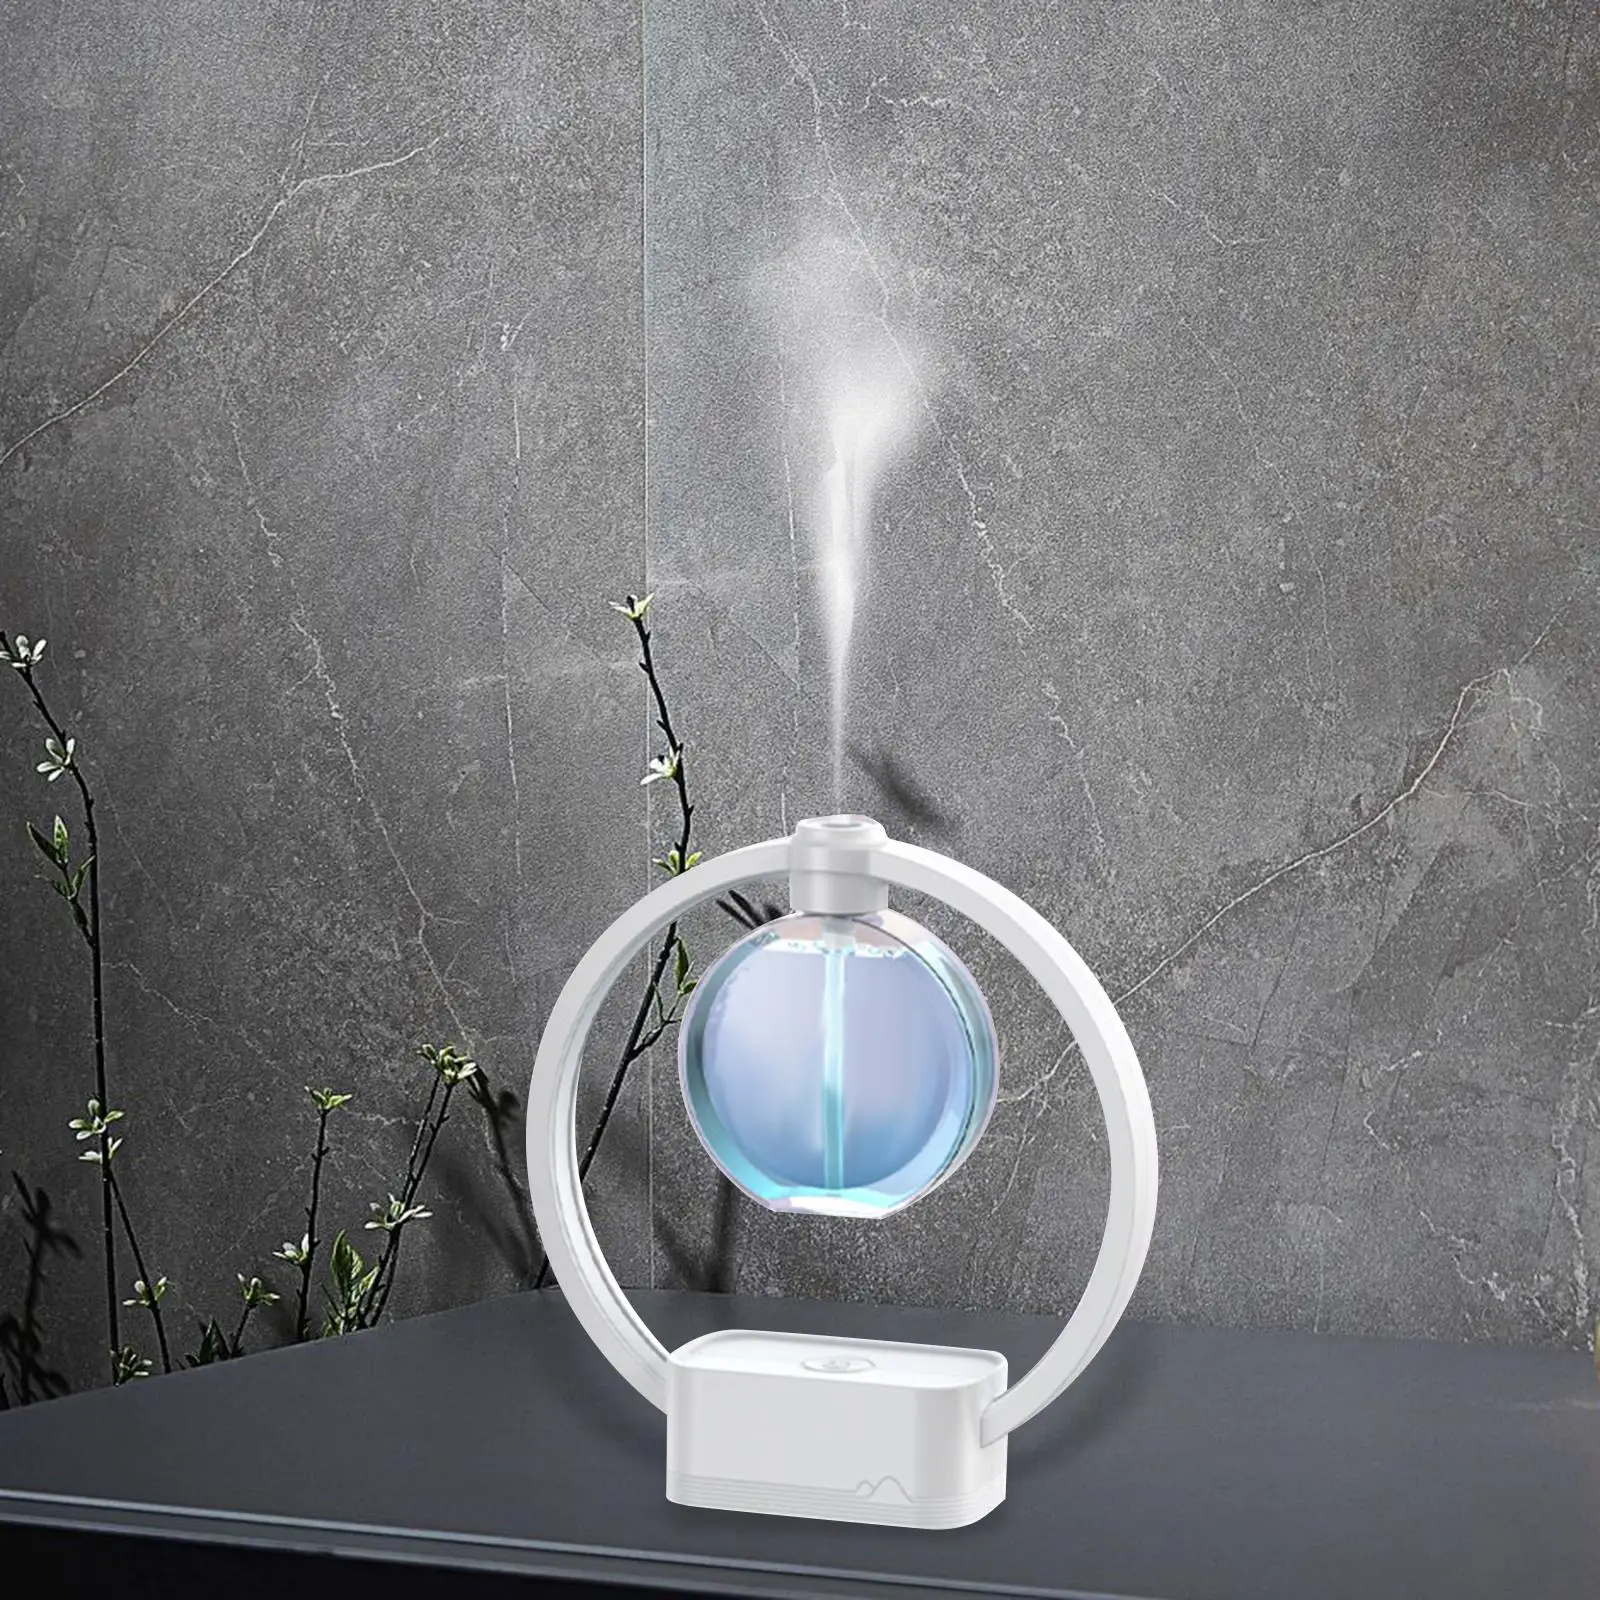 Portable Atmosphere Light Decorations Quiet Essential Oil Diffuser for Living Room Home SPA Office